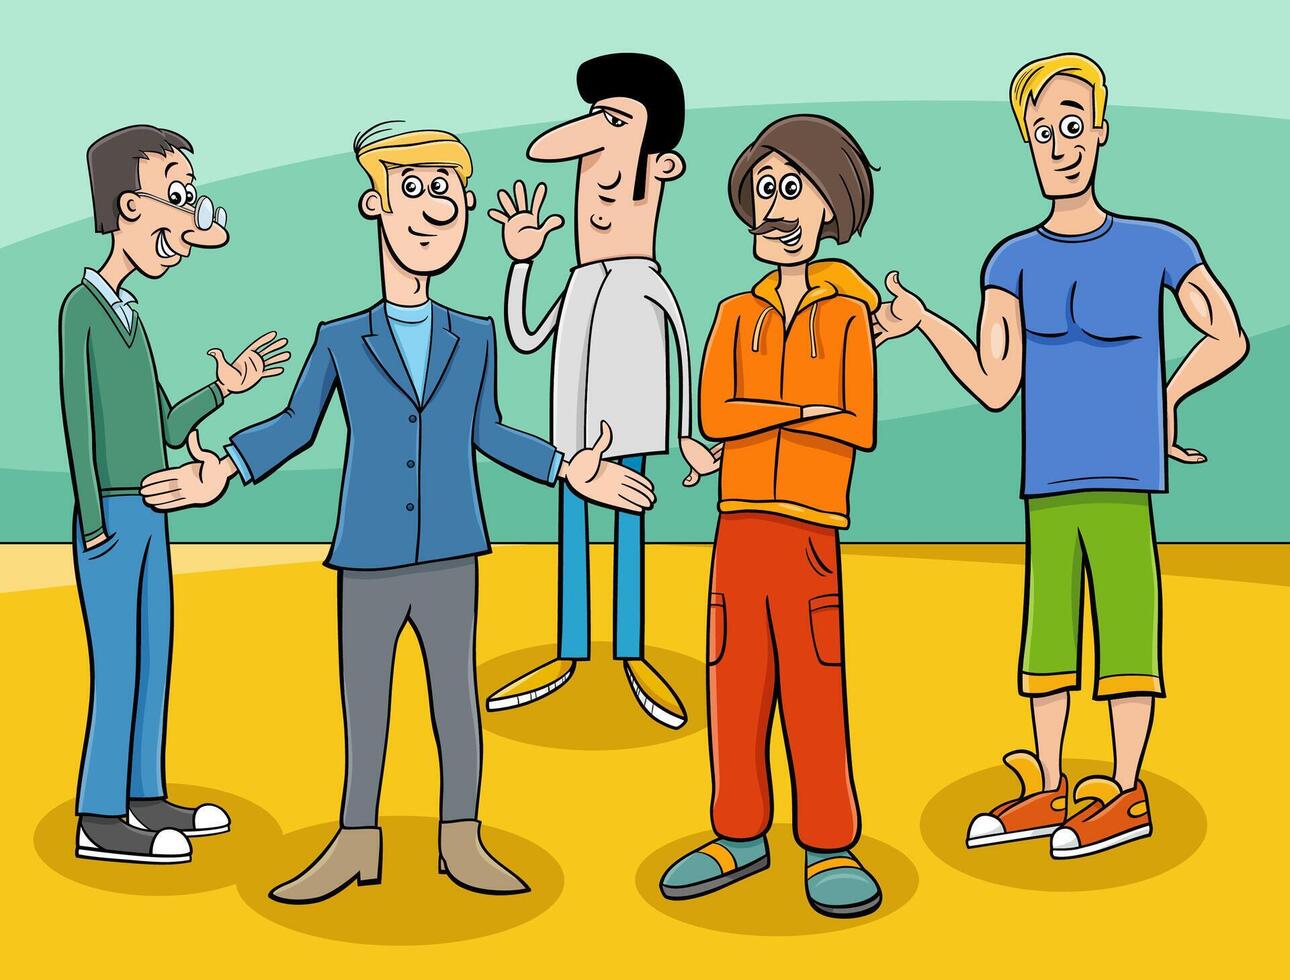 cartoon funny young men or boys comic characters group vector